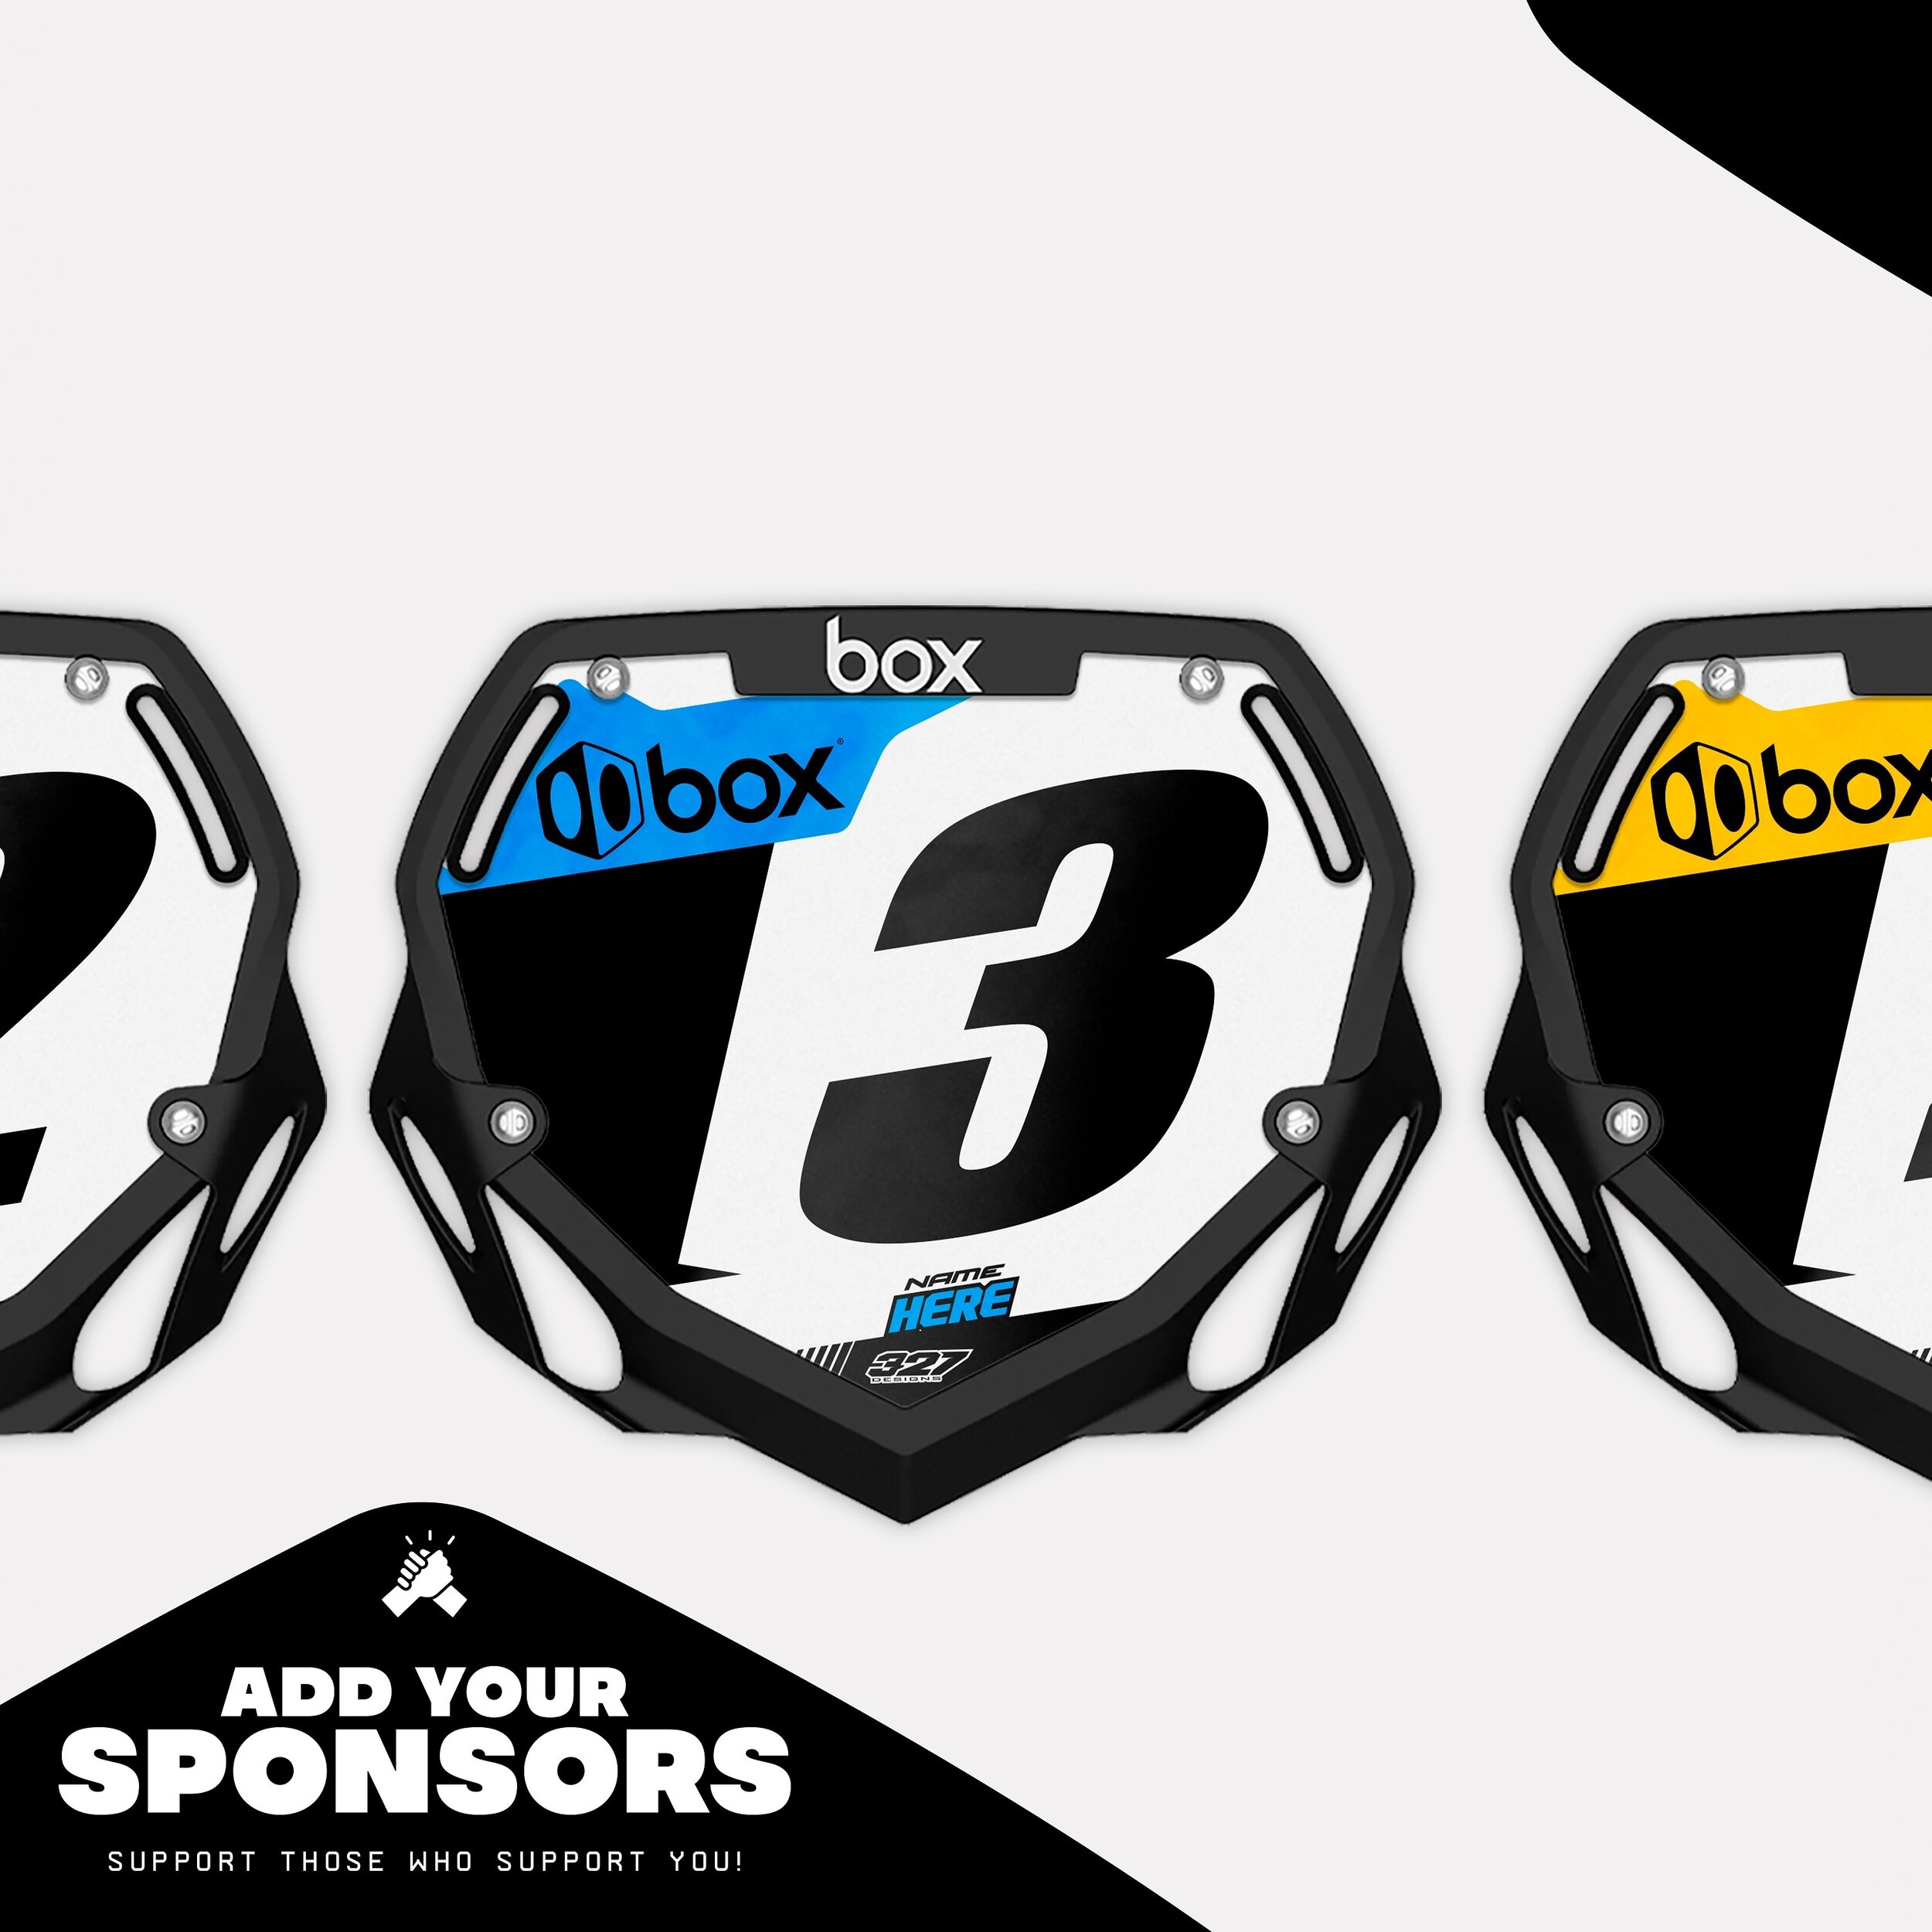 Official Partner with @boxbmx and the #boxlevelupprogram, we offer fully customized number plate inserts to match your jersey!  #327army

Available on our website 🖥️ 327Designs.com
*Access Code via Team FB page*

&mdash;

#bmx #bmxracing #vinyl #usa